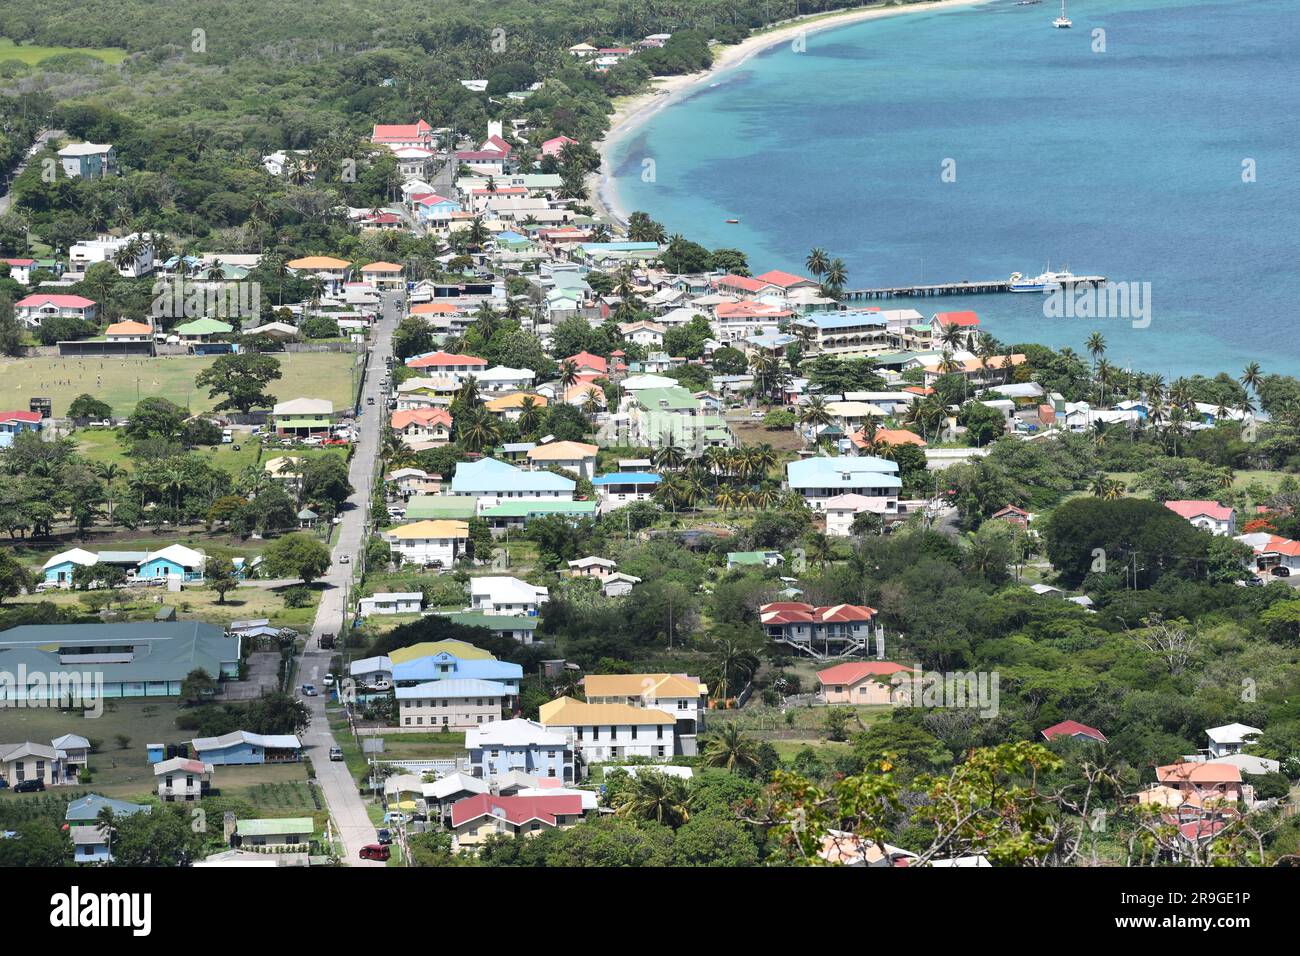 View from Belair, Carriacou, one of the islands off the coast of Grenada. In this photo the town of Hillsborough and the ocean can be seen. Stock Photo